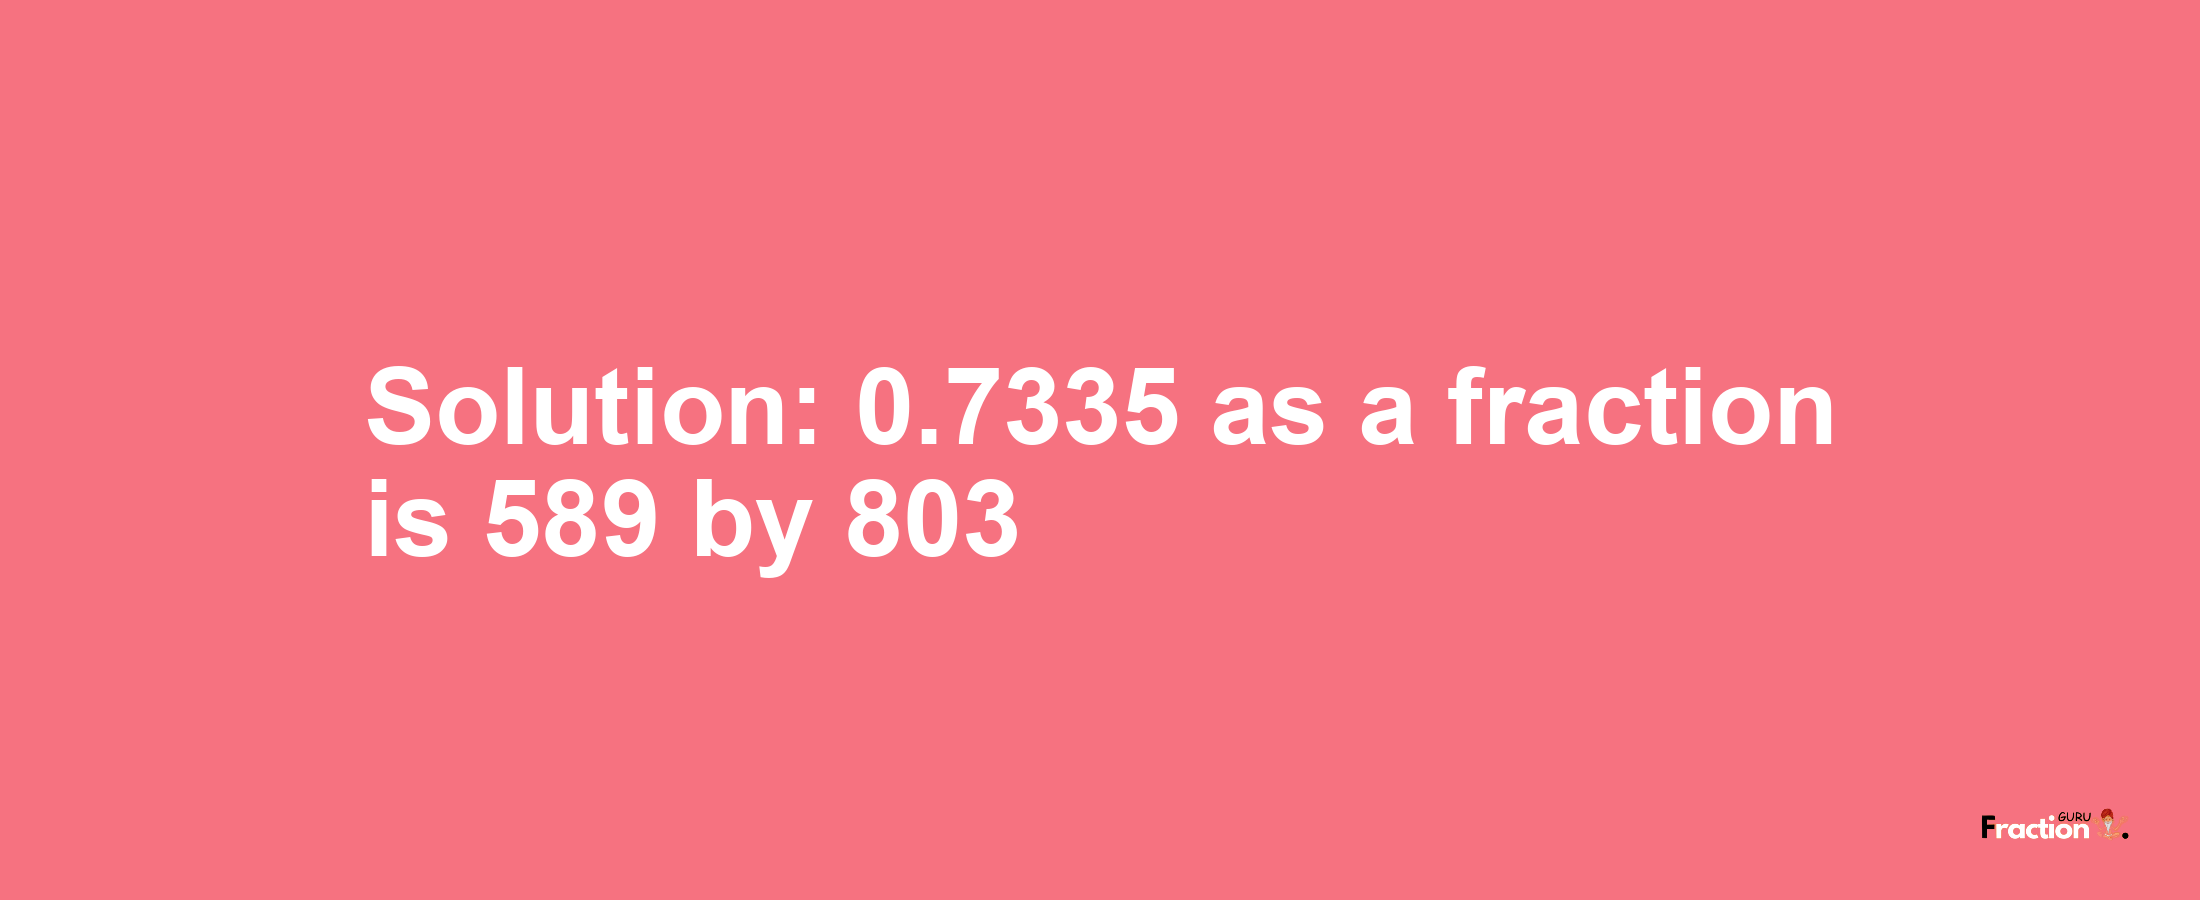 Solution:0.7335 as a fraction is 589/803